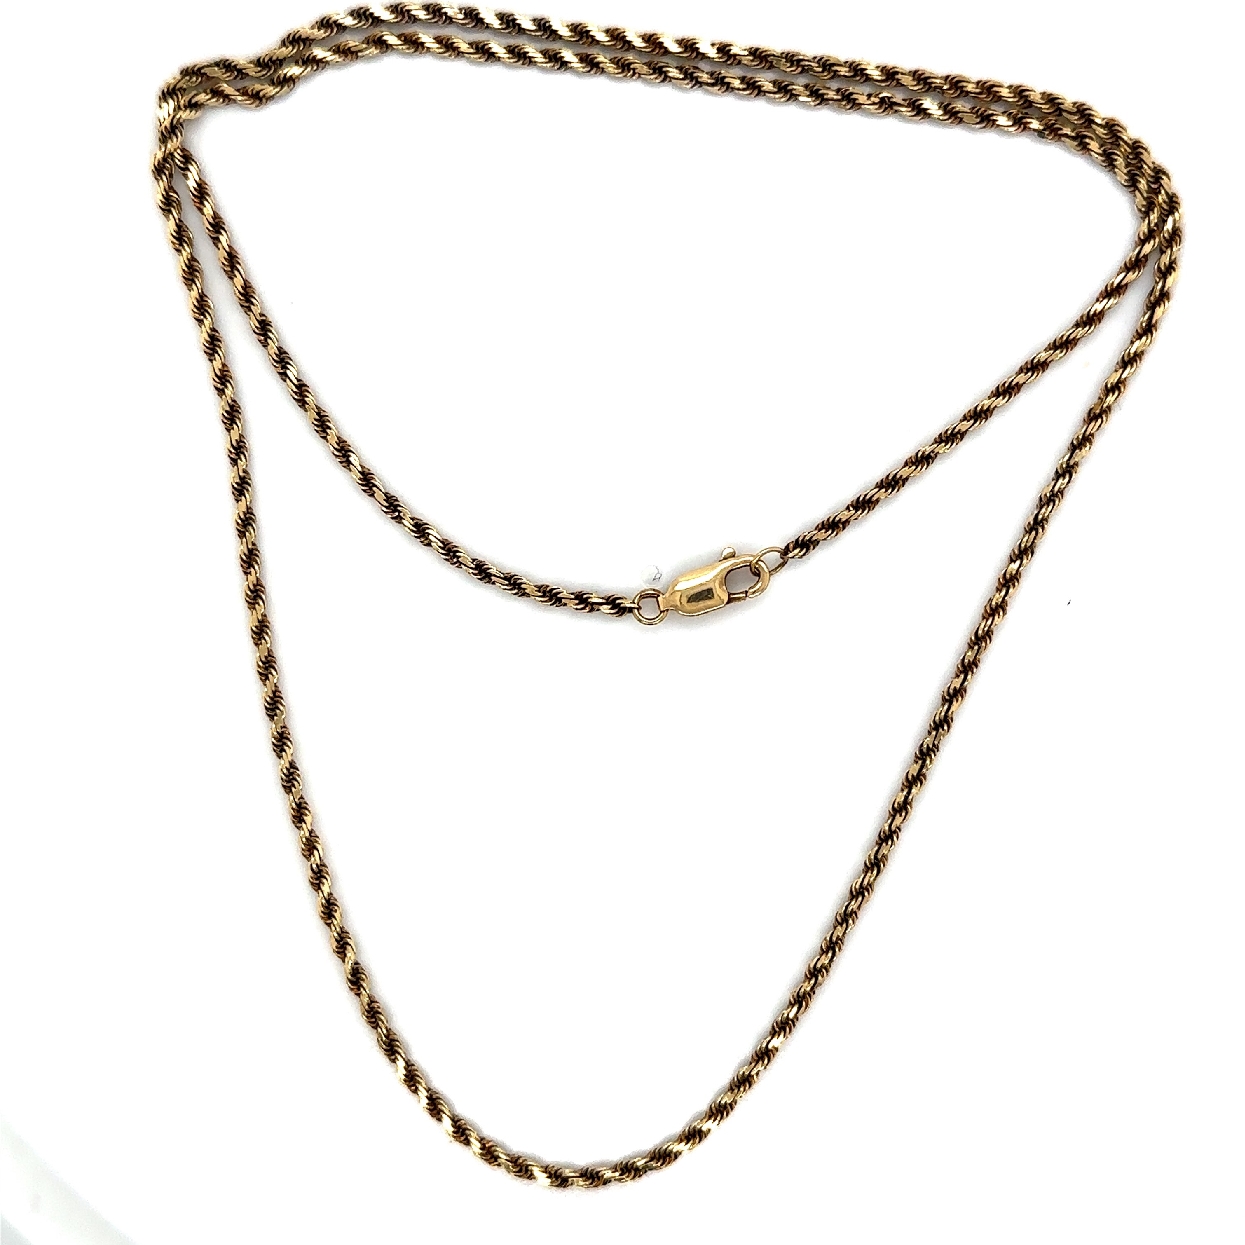 14K Yellow Gold Rope Chain

20 Inches 